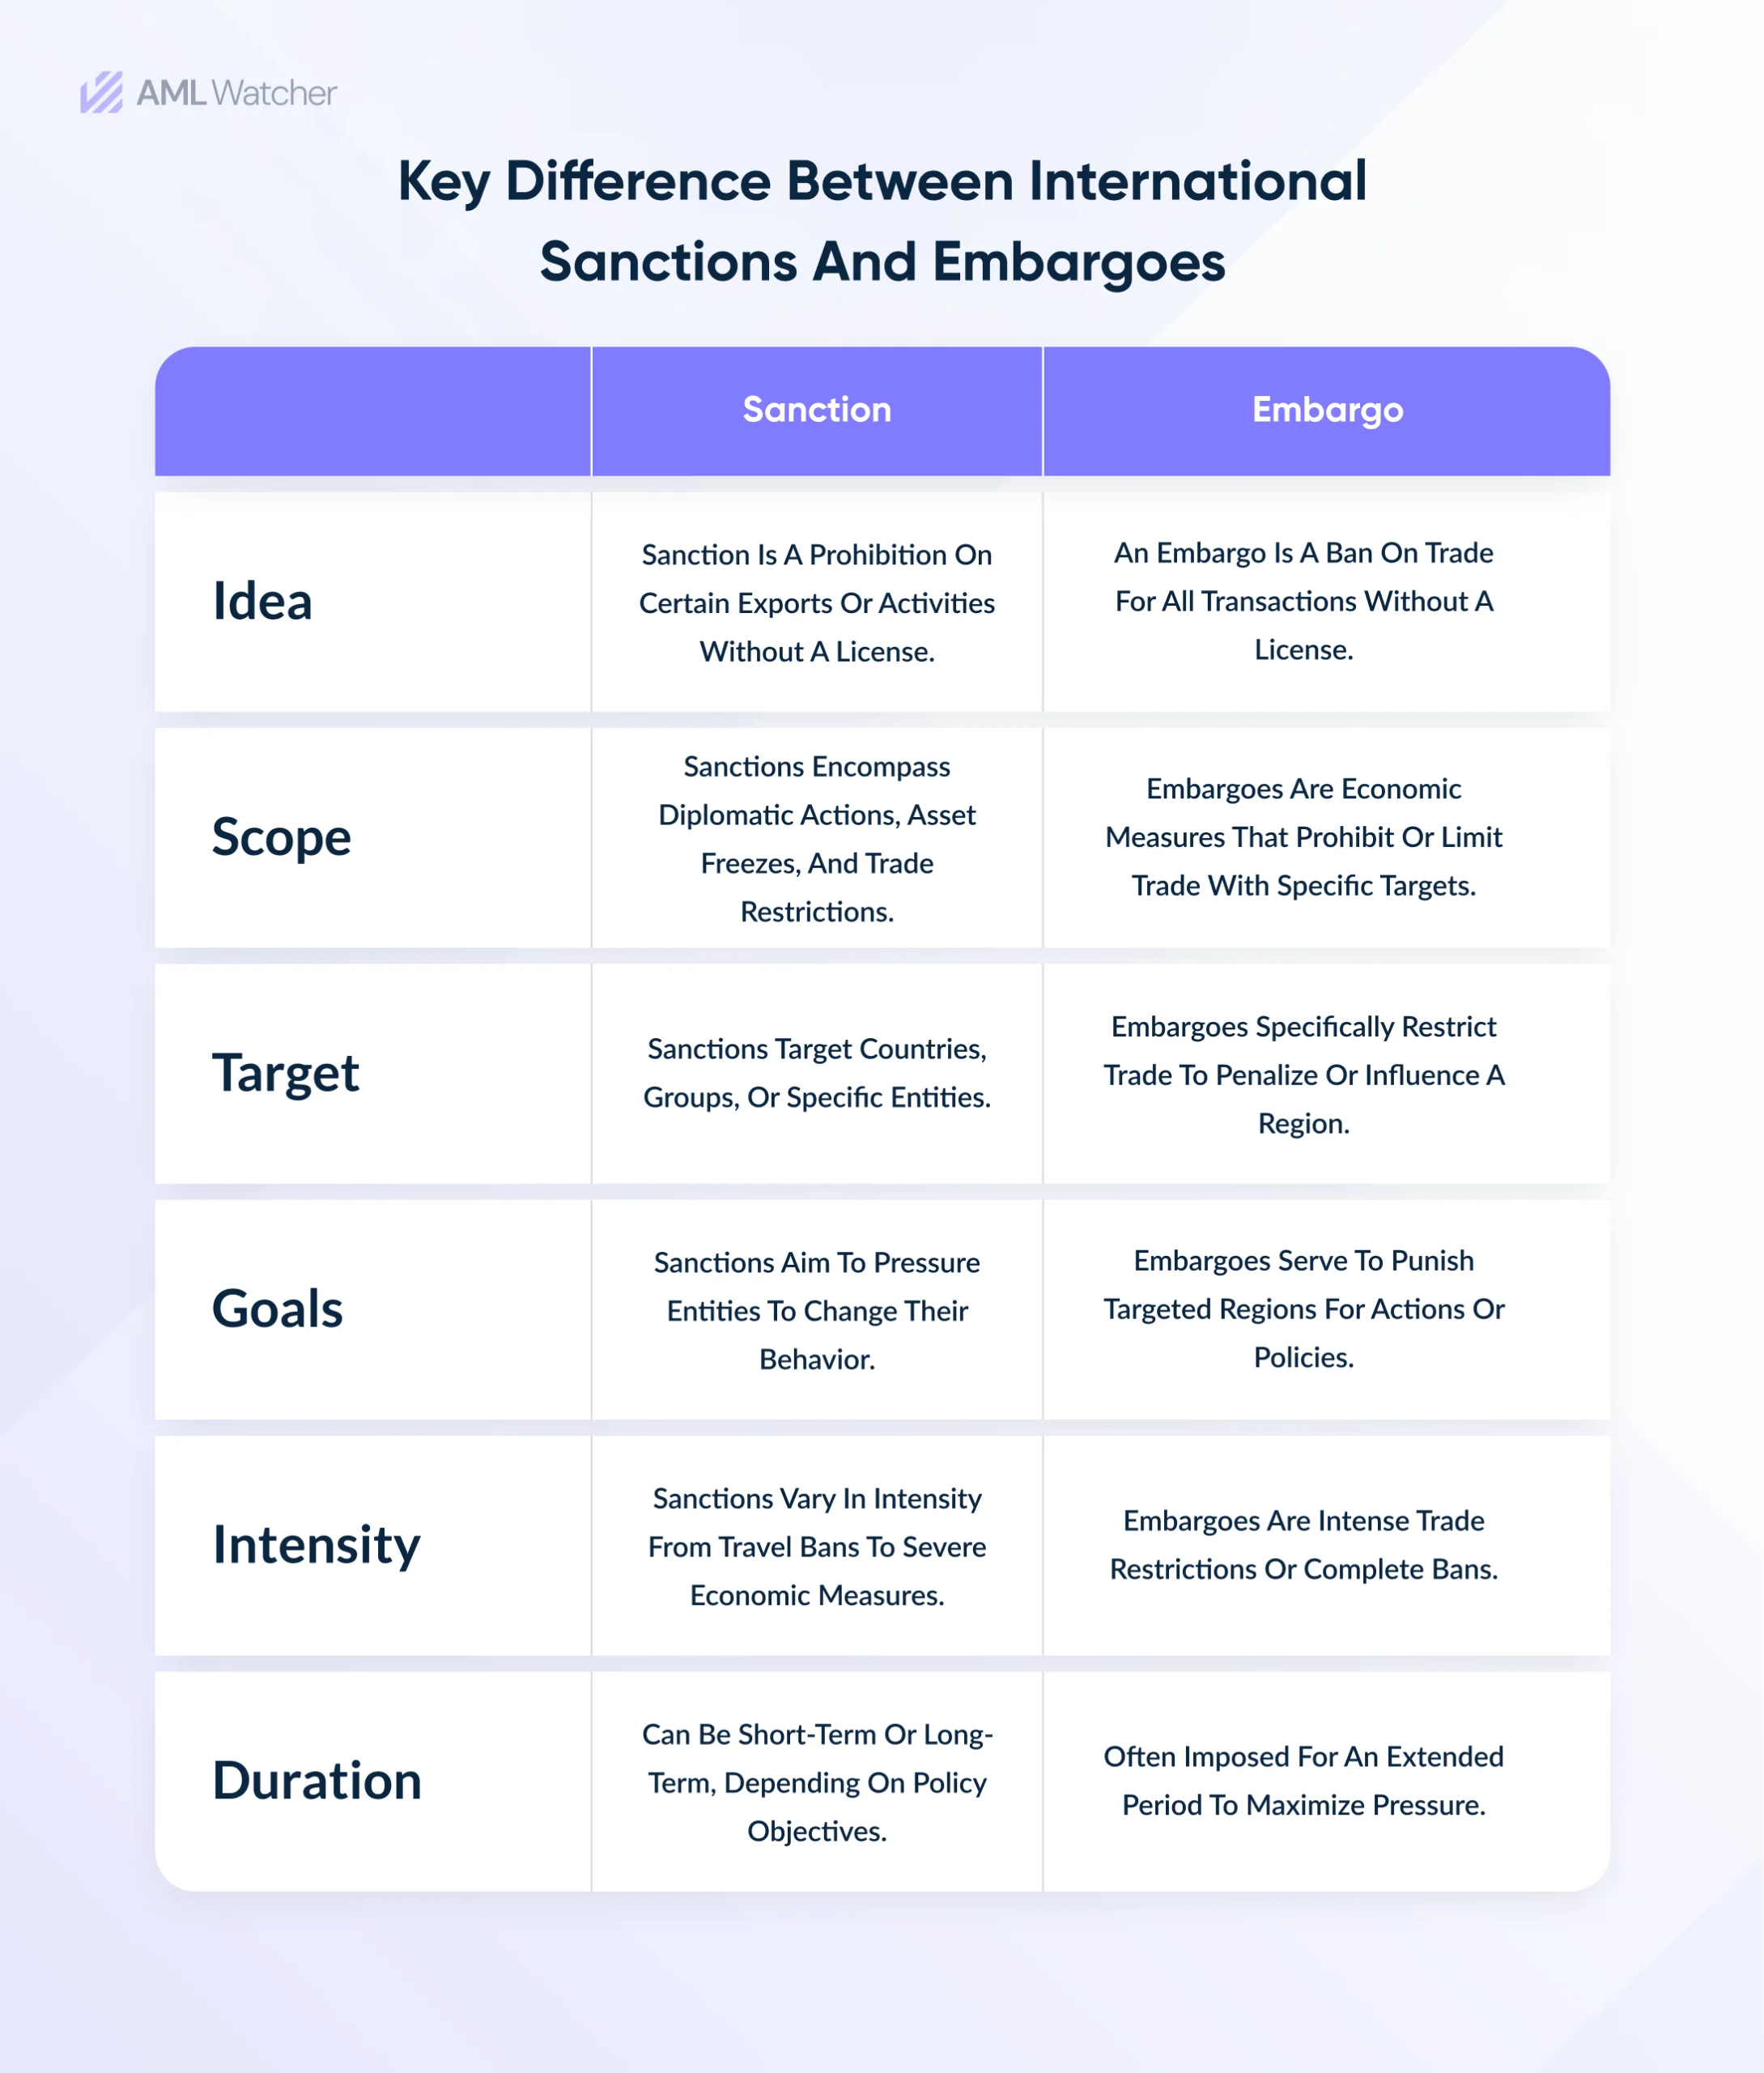 The image shows the key difference between global Sanctions and embargoes.  